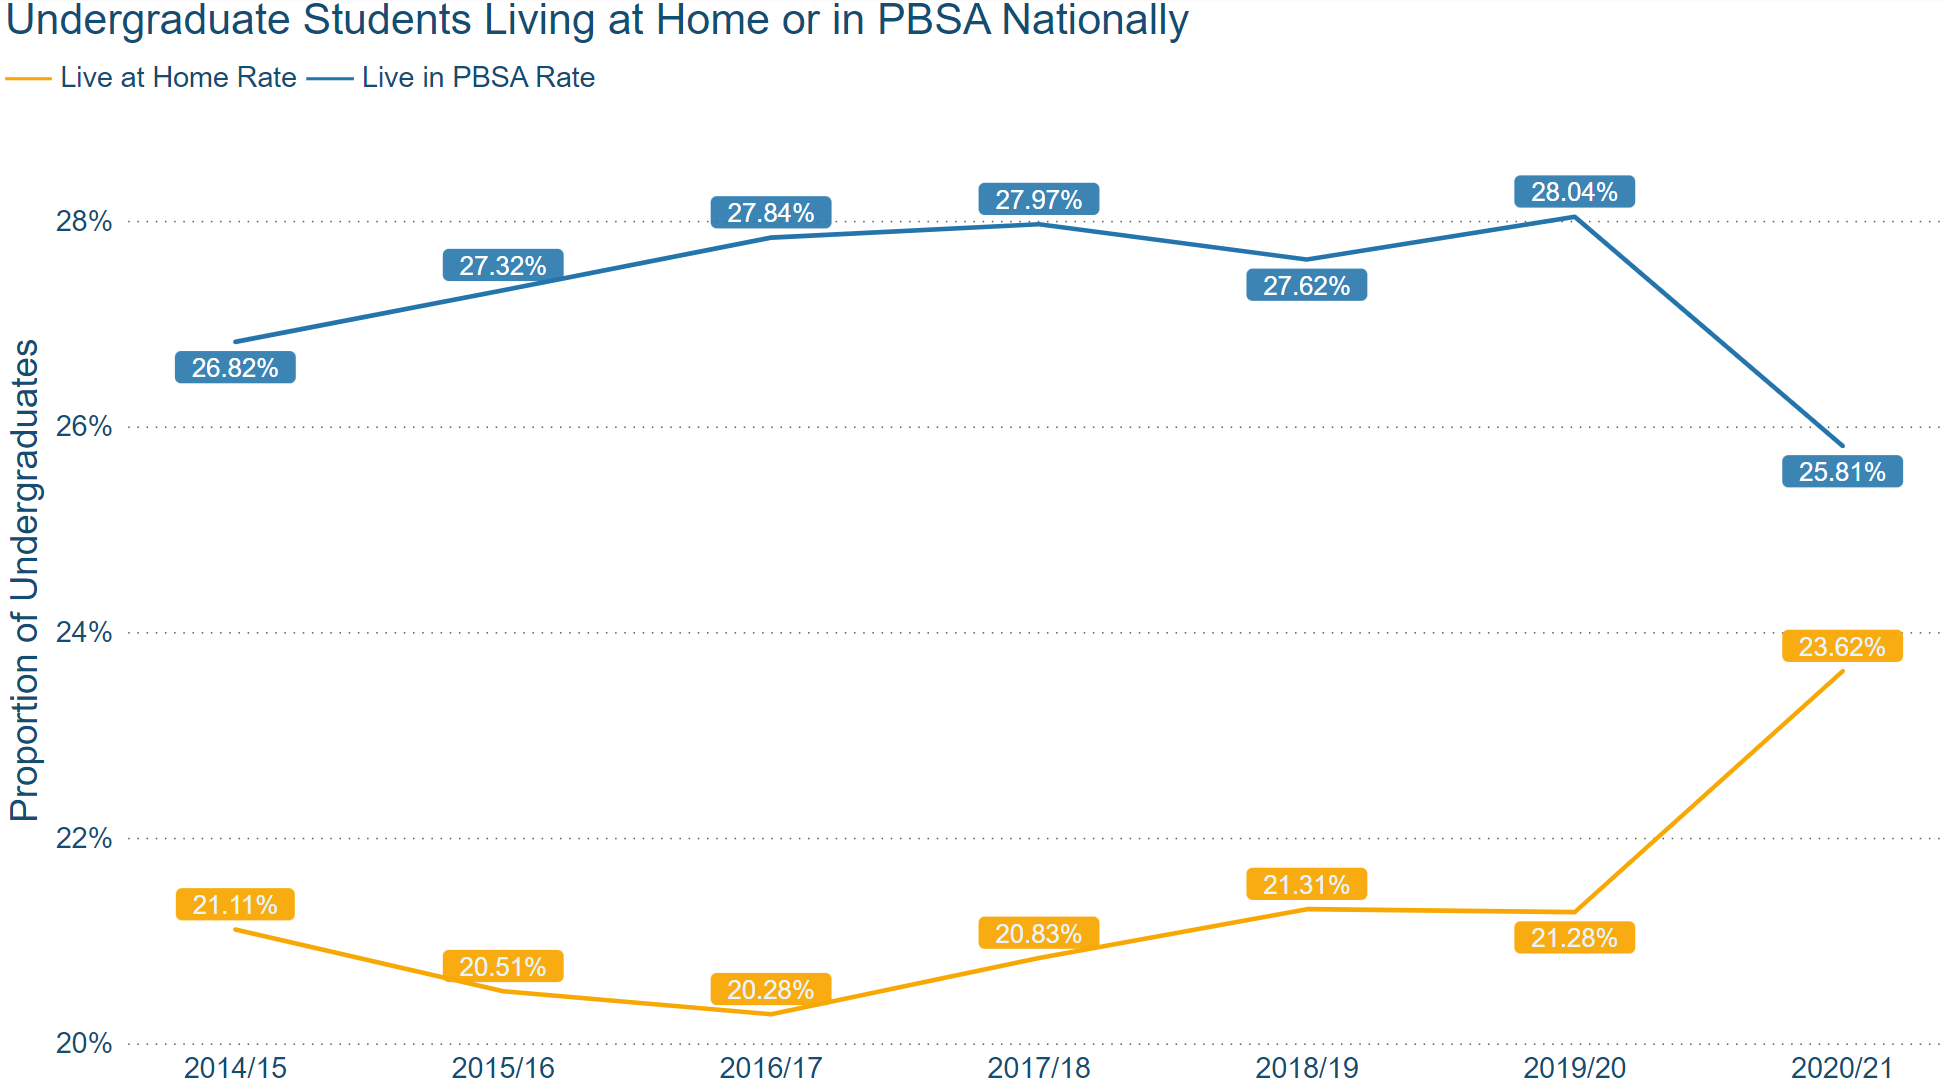 Annual Live at Home vs PBSA Rates max-width:100 height=